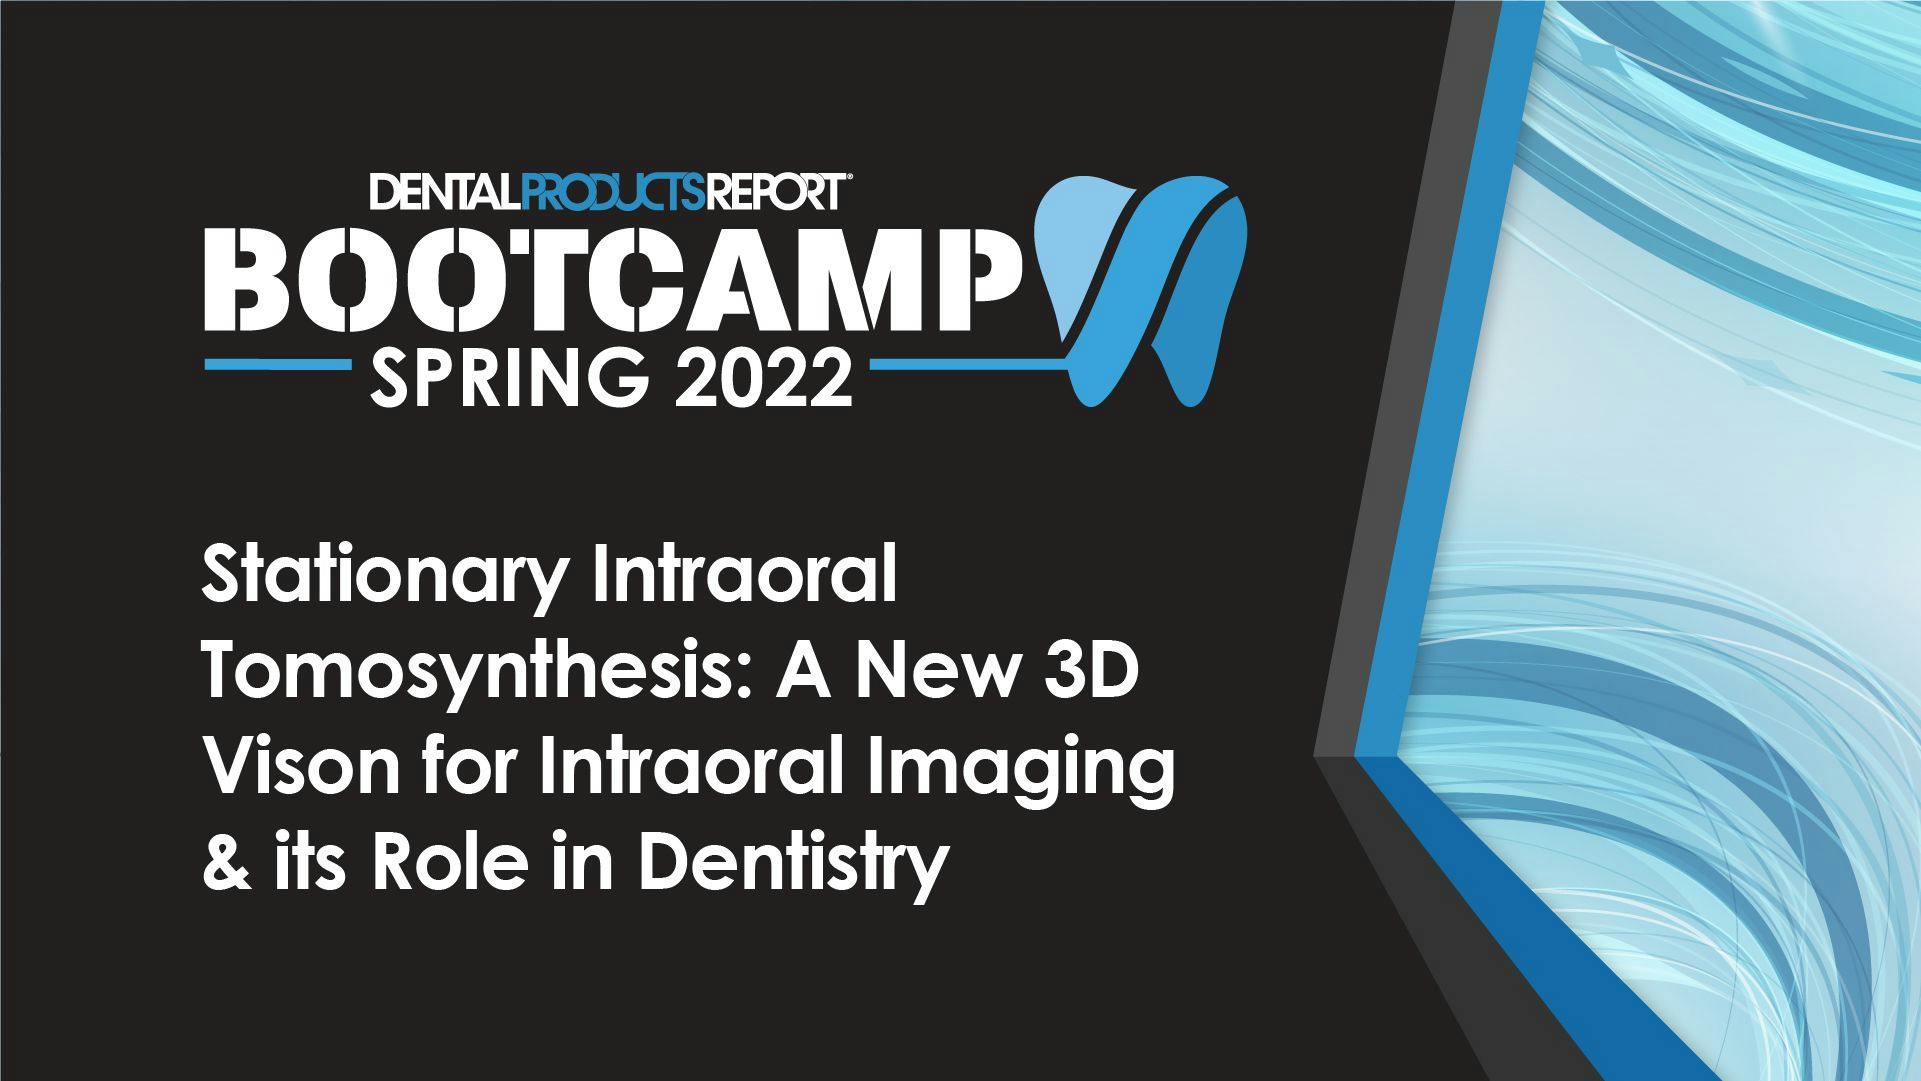 Stationary Intraoral Tomosynthesis: A New 3D Vison for Intraoral Imaging & its Role in Dentistry